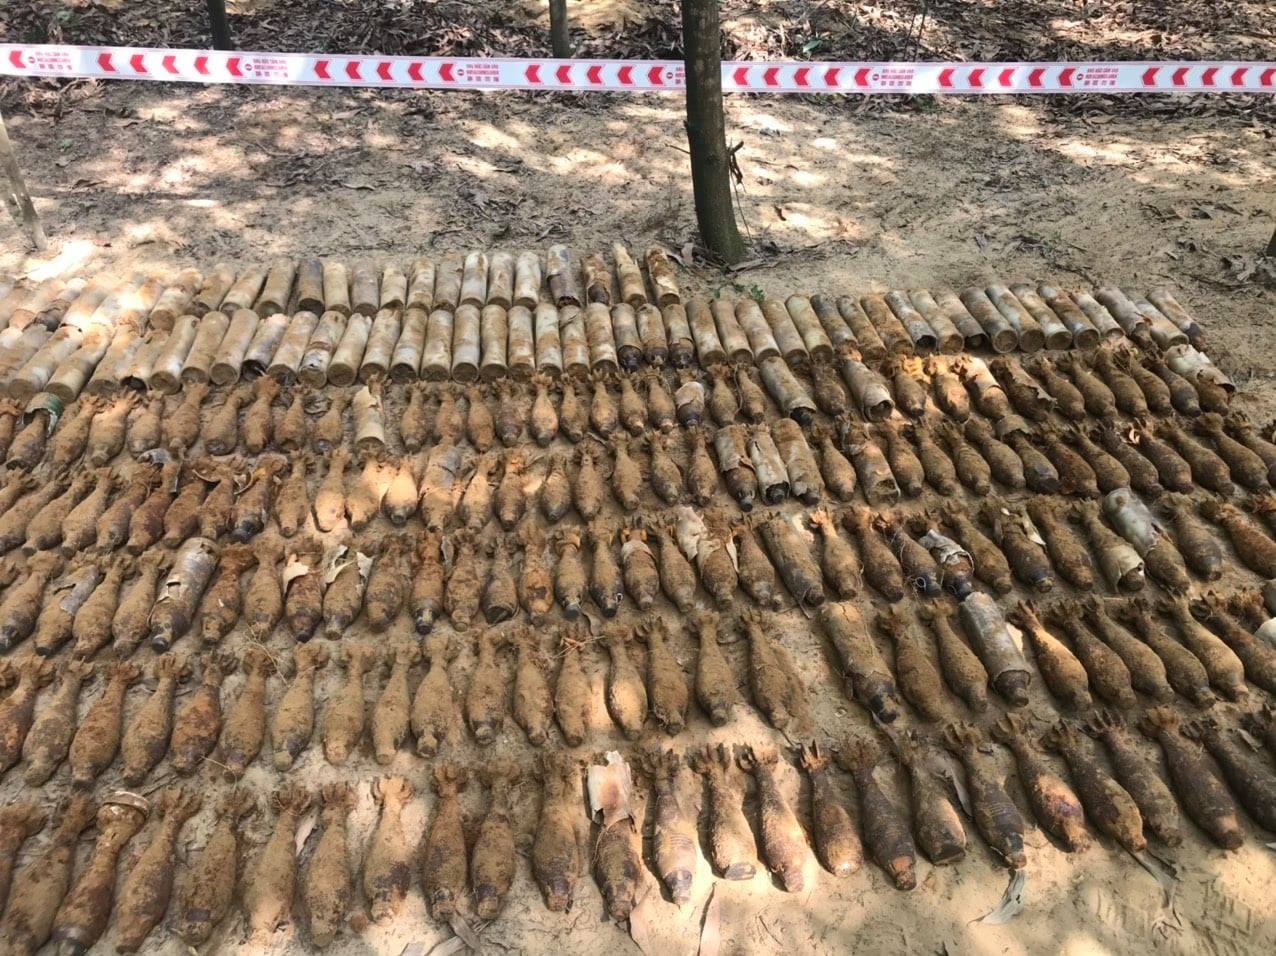 A large number of UXO found in Quang Tri